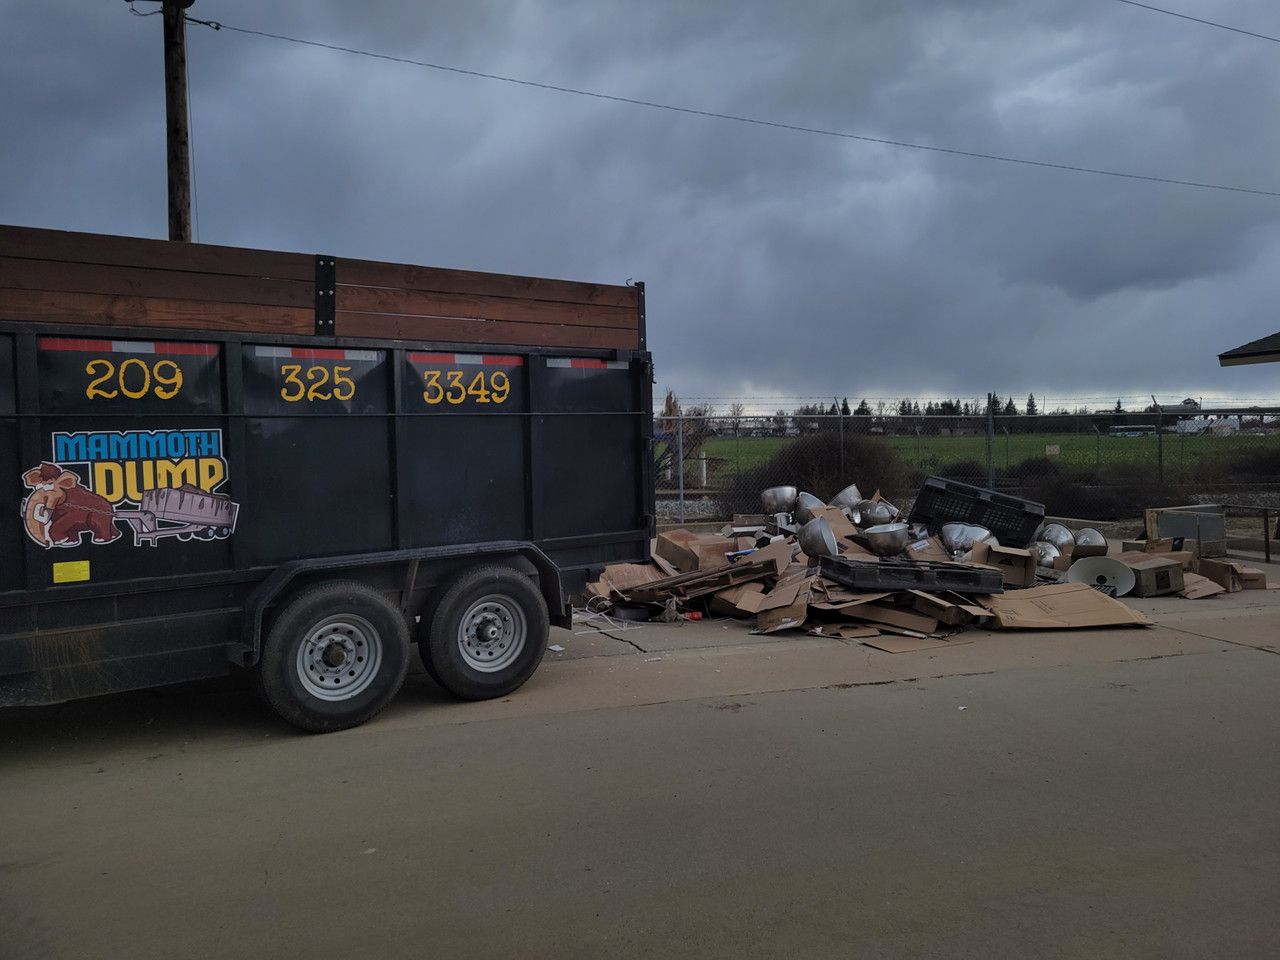 20 yard dumpster parked in front of a pile of commercial lighting waste and cardboard boxes